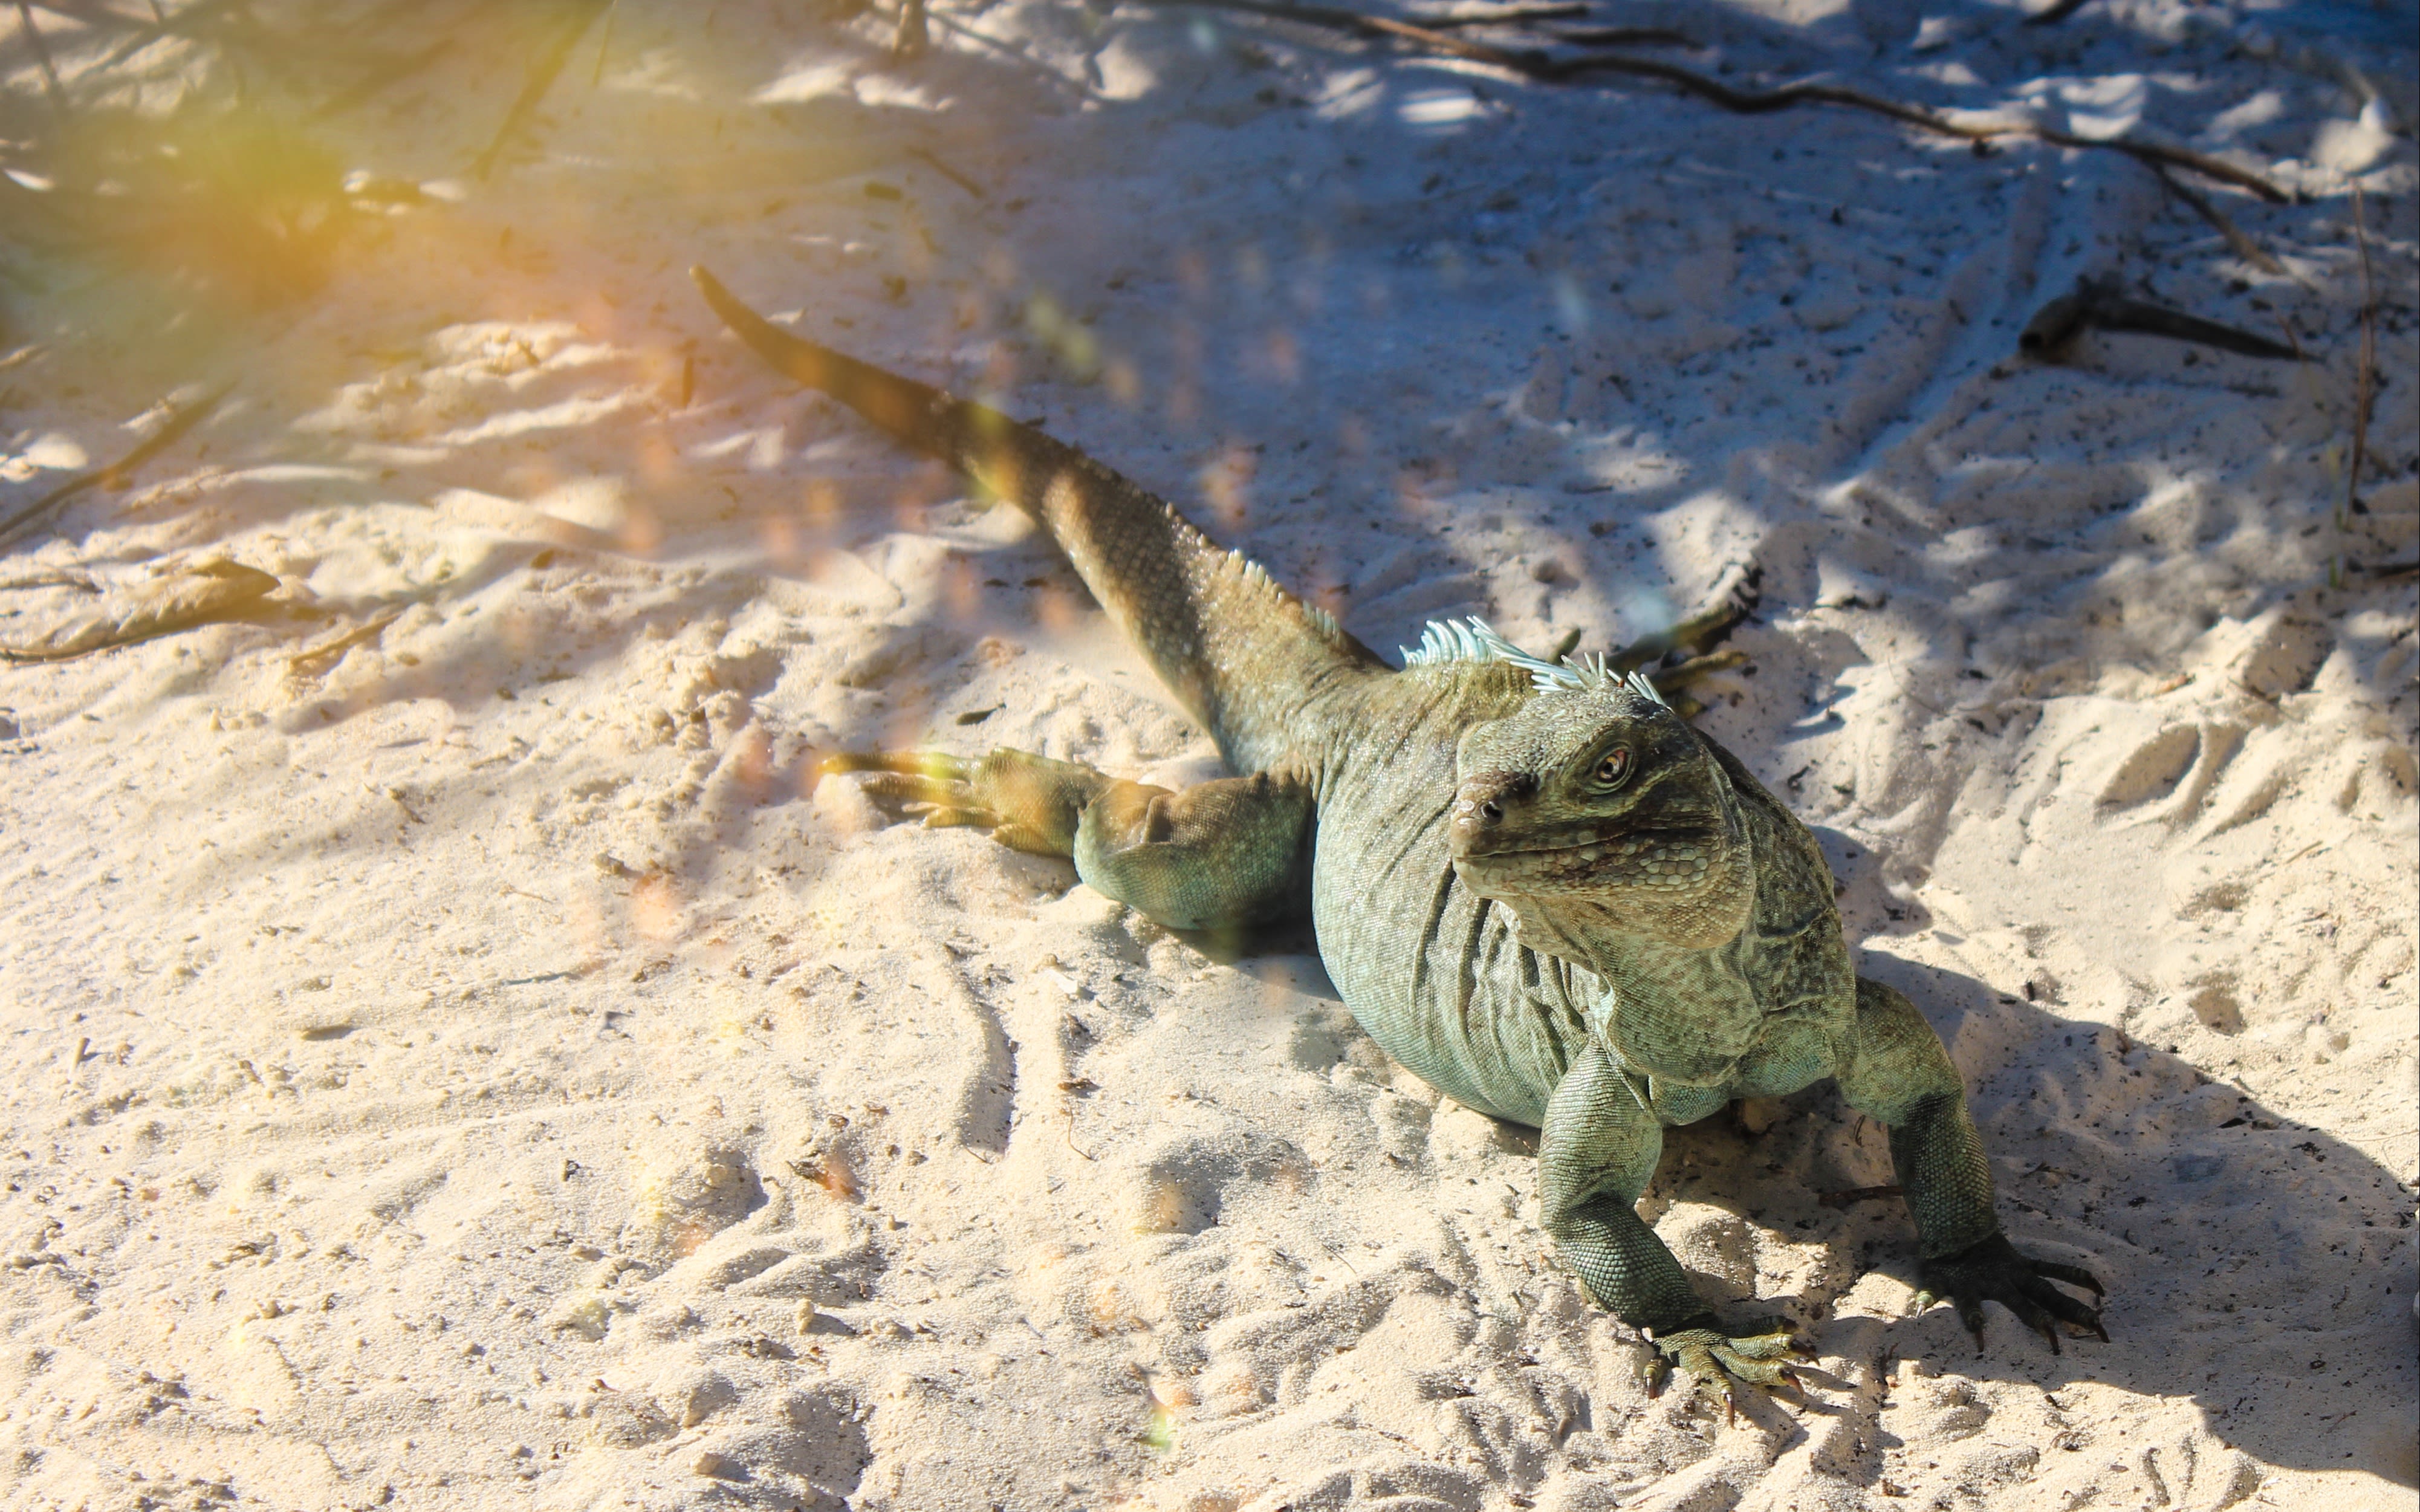 An image of rock iguanas in Turks & Caicos